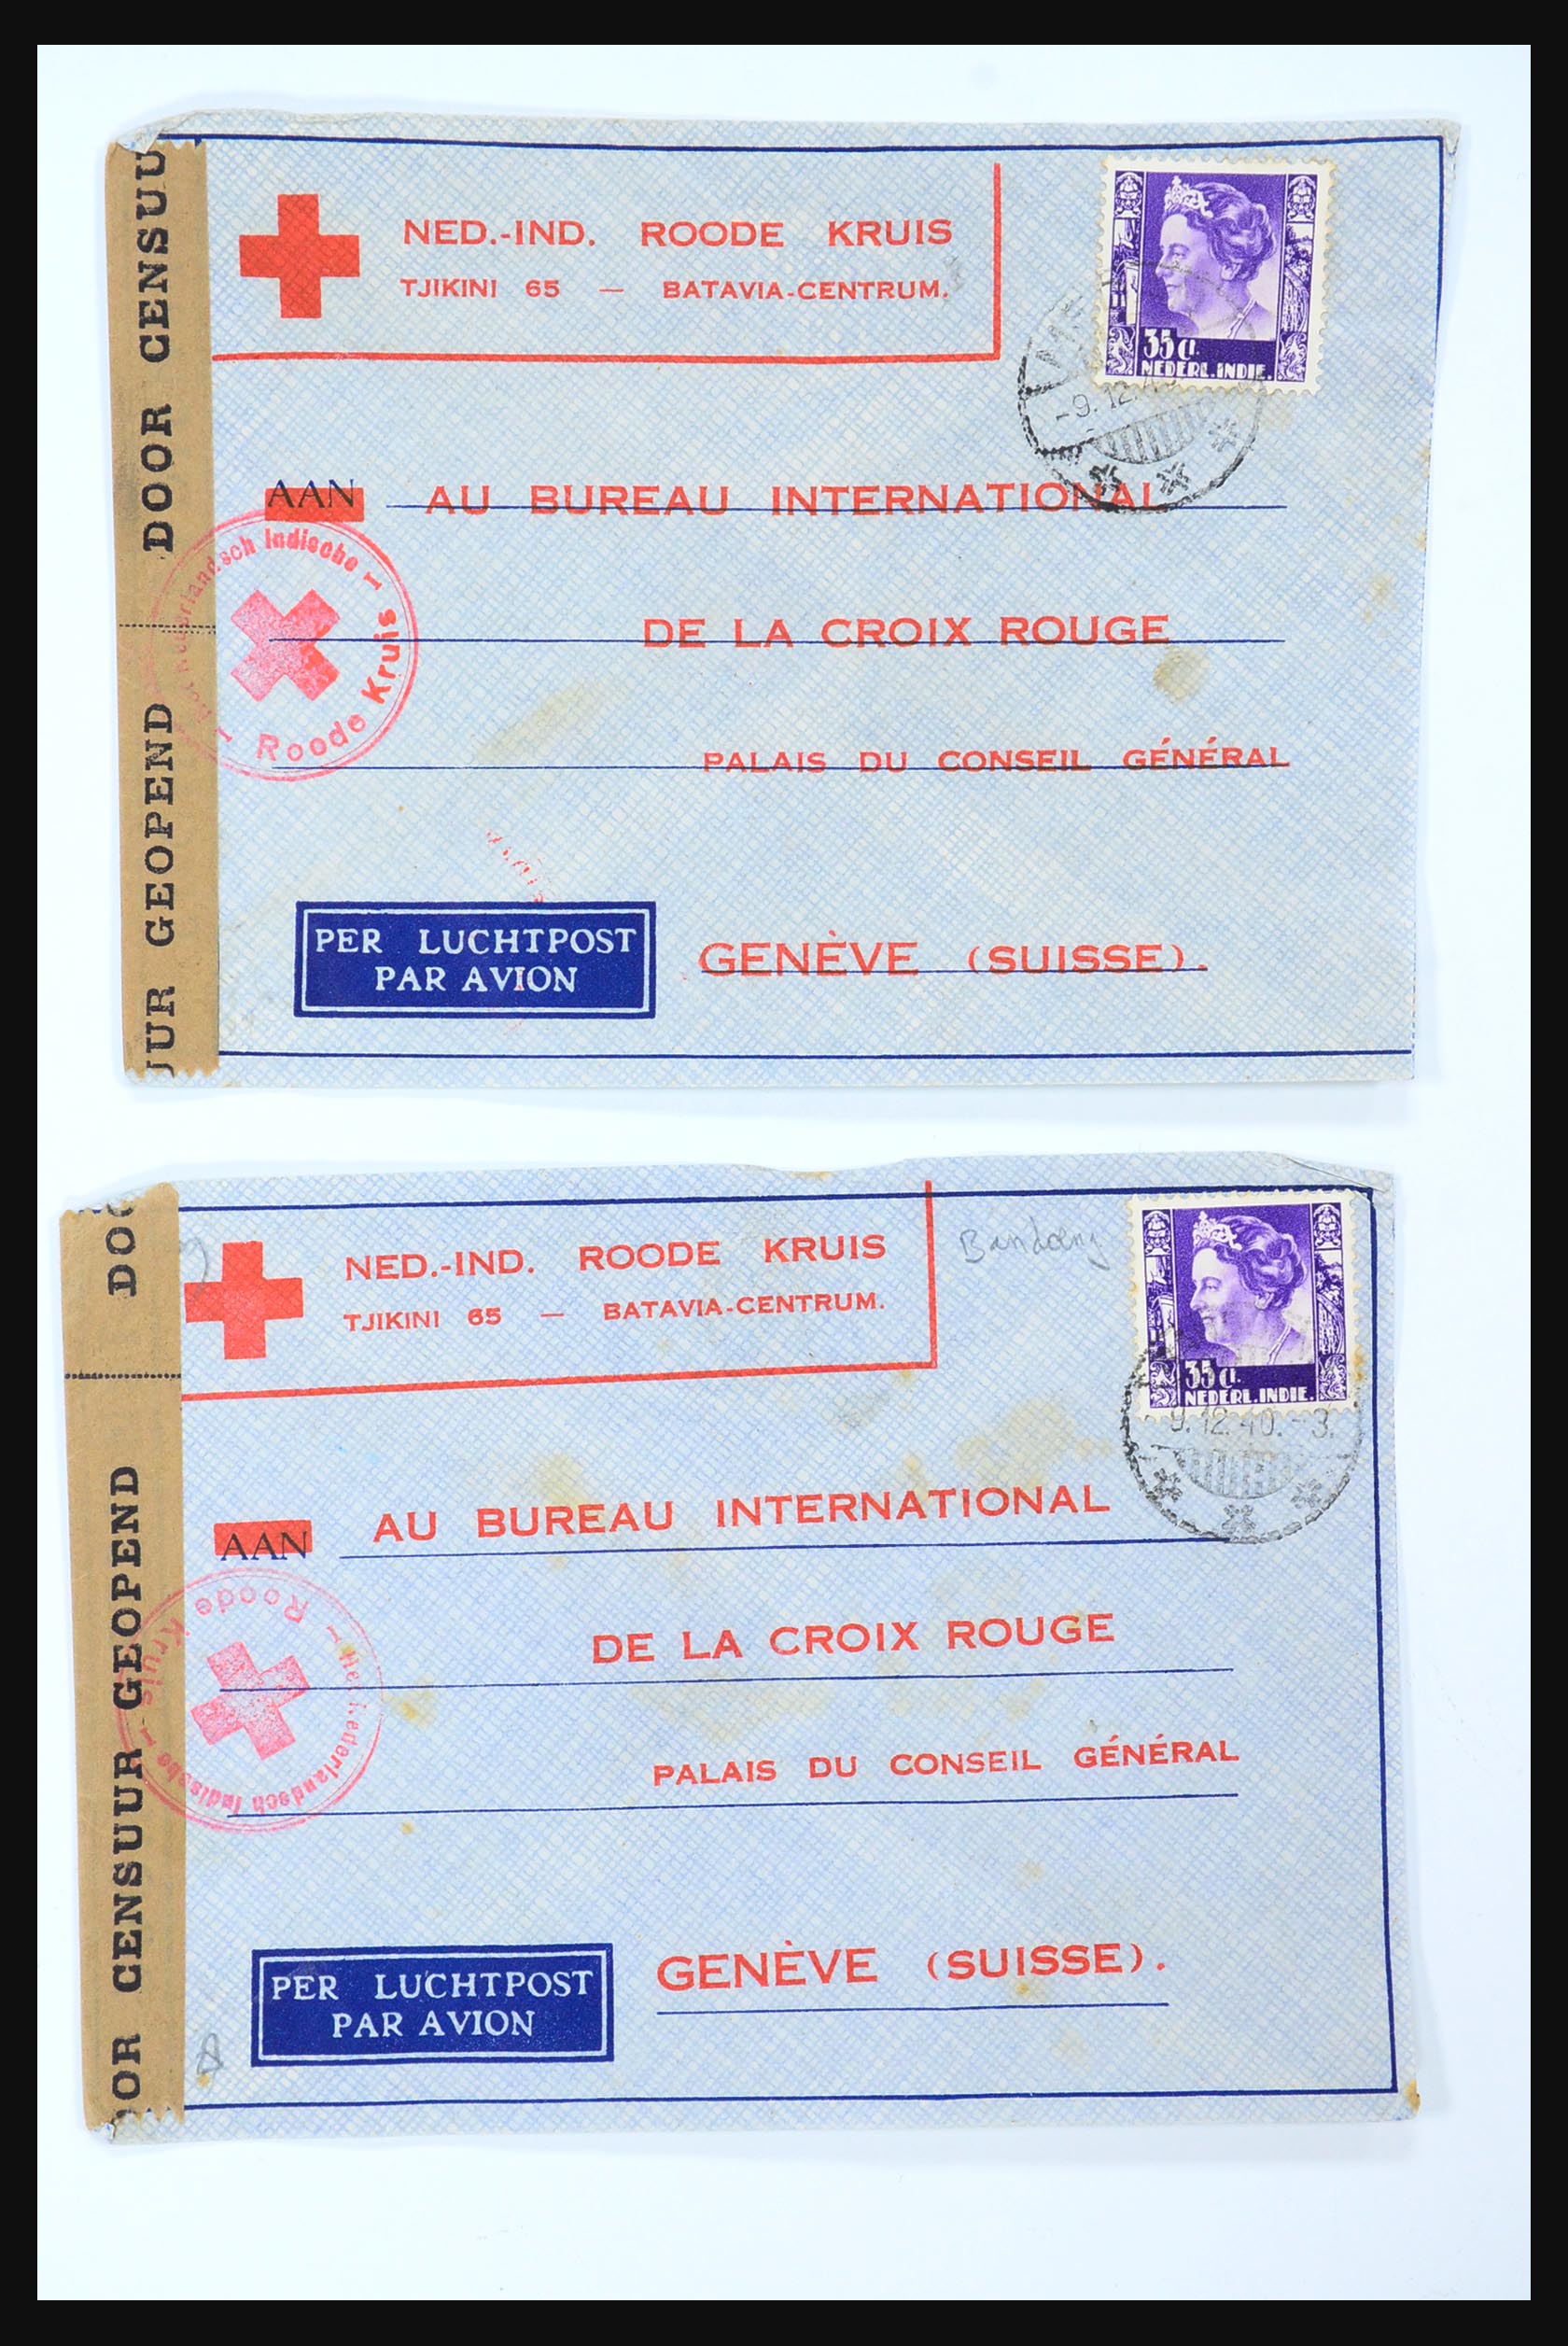 31362 108 - 31362 Netherlands Indies Japanese occupation covers 1942-1945.